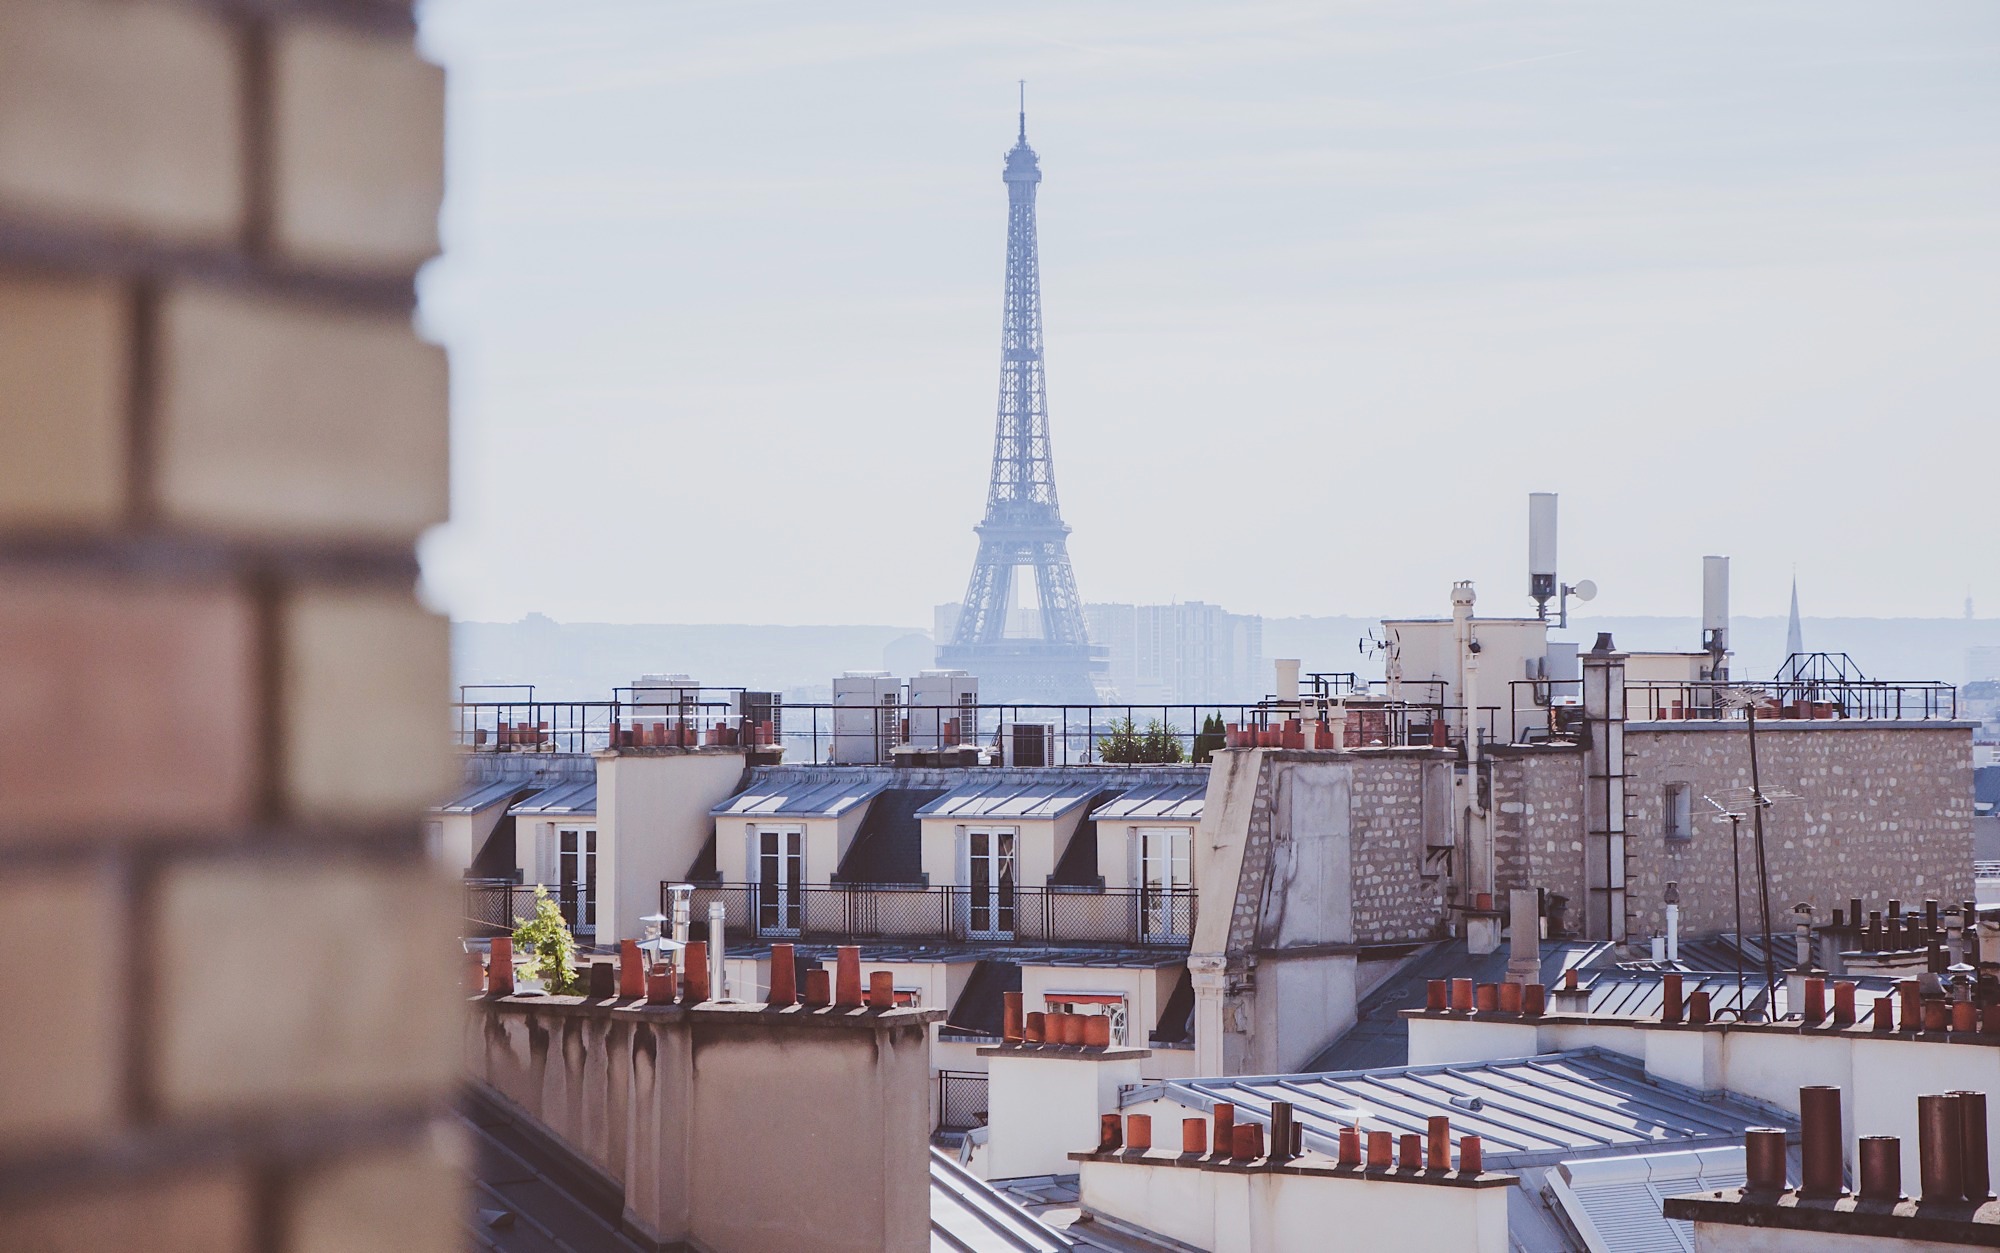 Paris travel tips and ideas | DESIGN THE LIFE YOU WANT TO LIVE | Lynne Knowlton